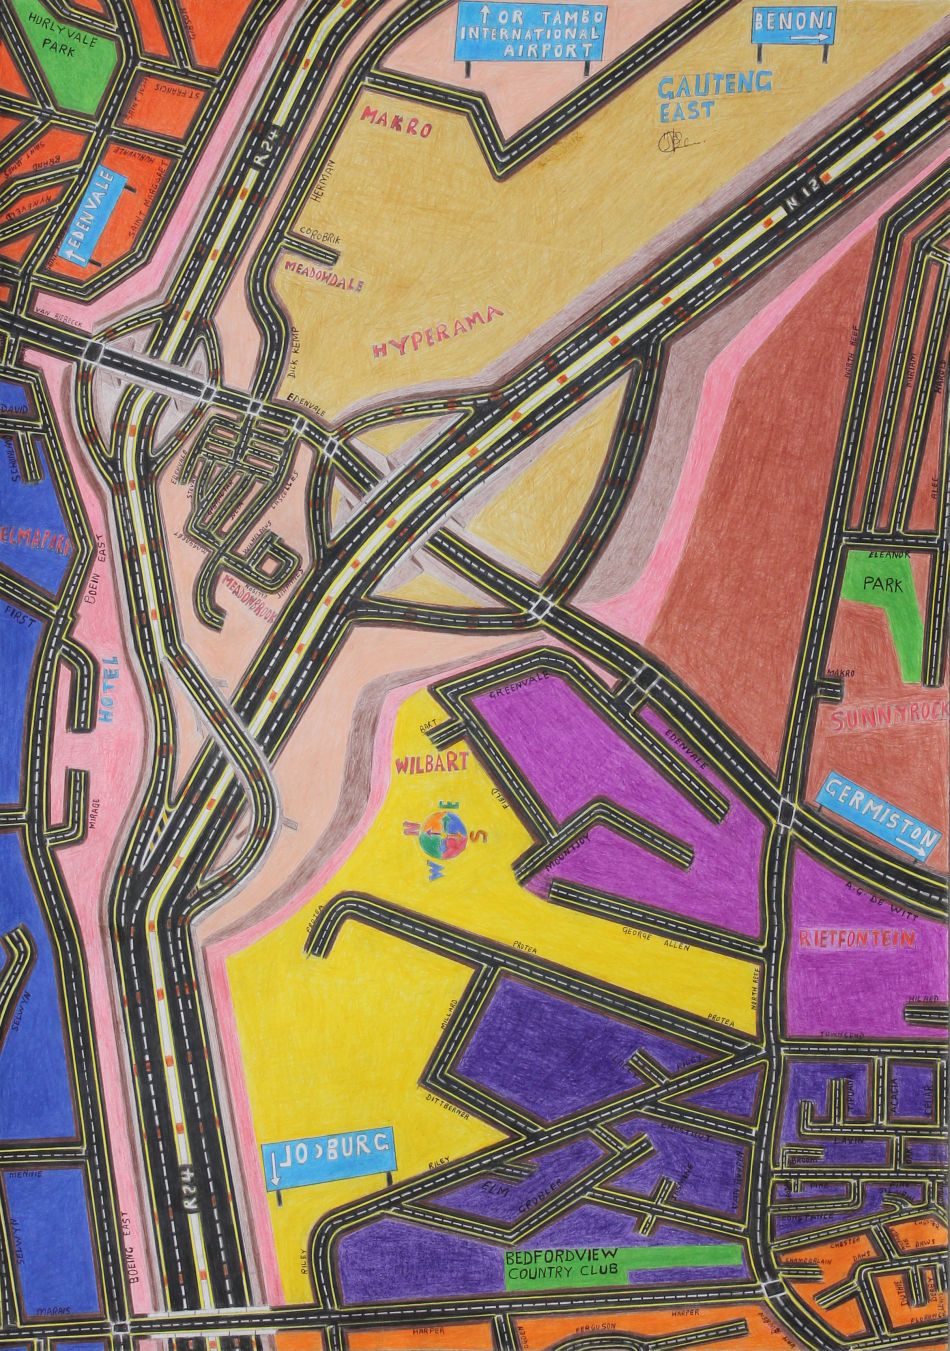 Click the image for a view of: Gauteng East. 2013. Colour pencil on paper. 860X710mm